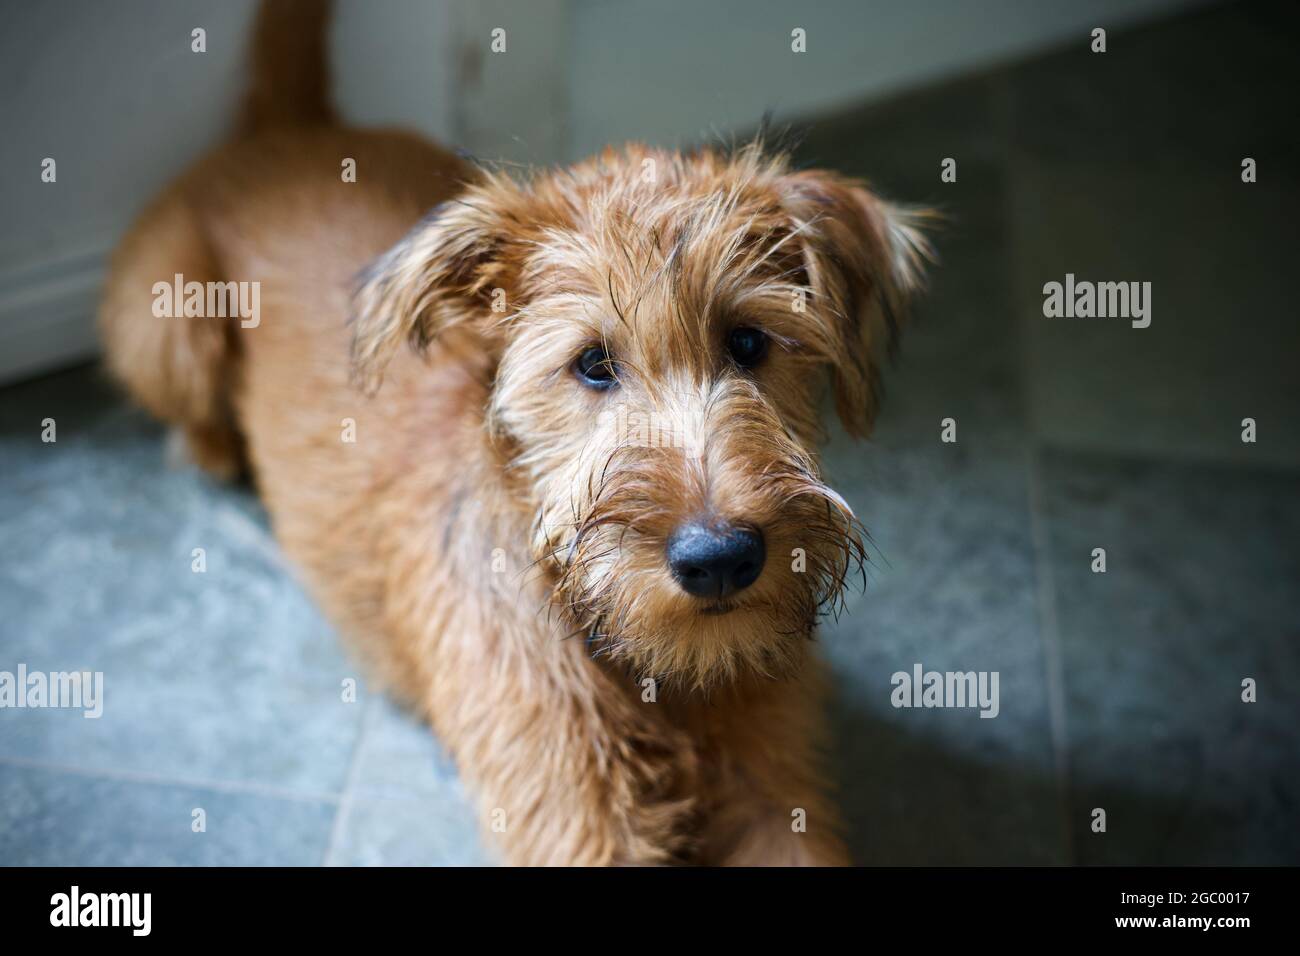 Irish Terrier Puppy High Resolution Stock Photography and Images - Alamy